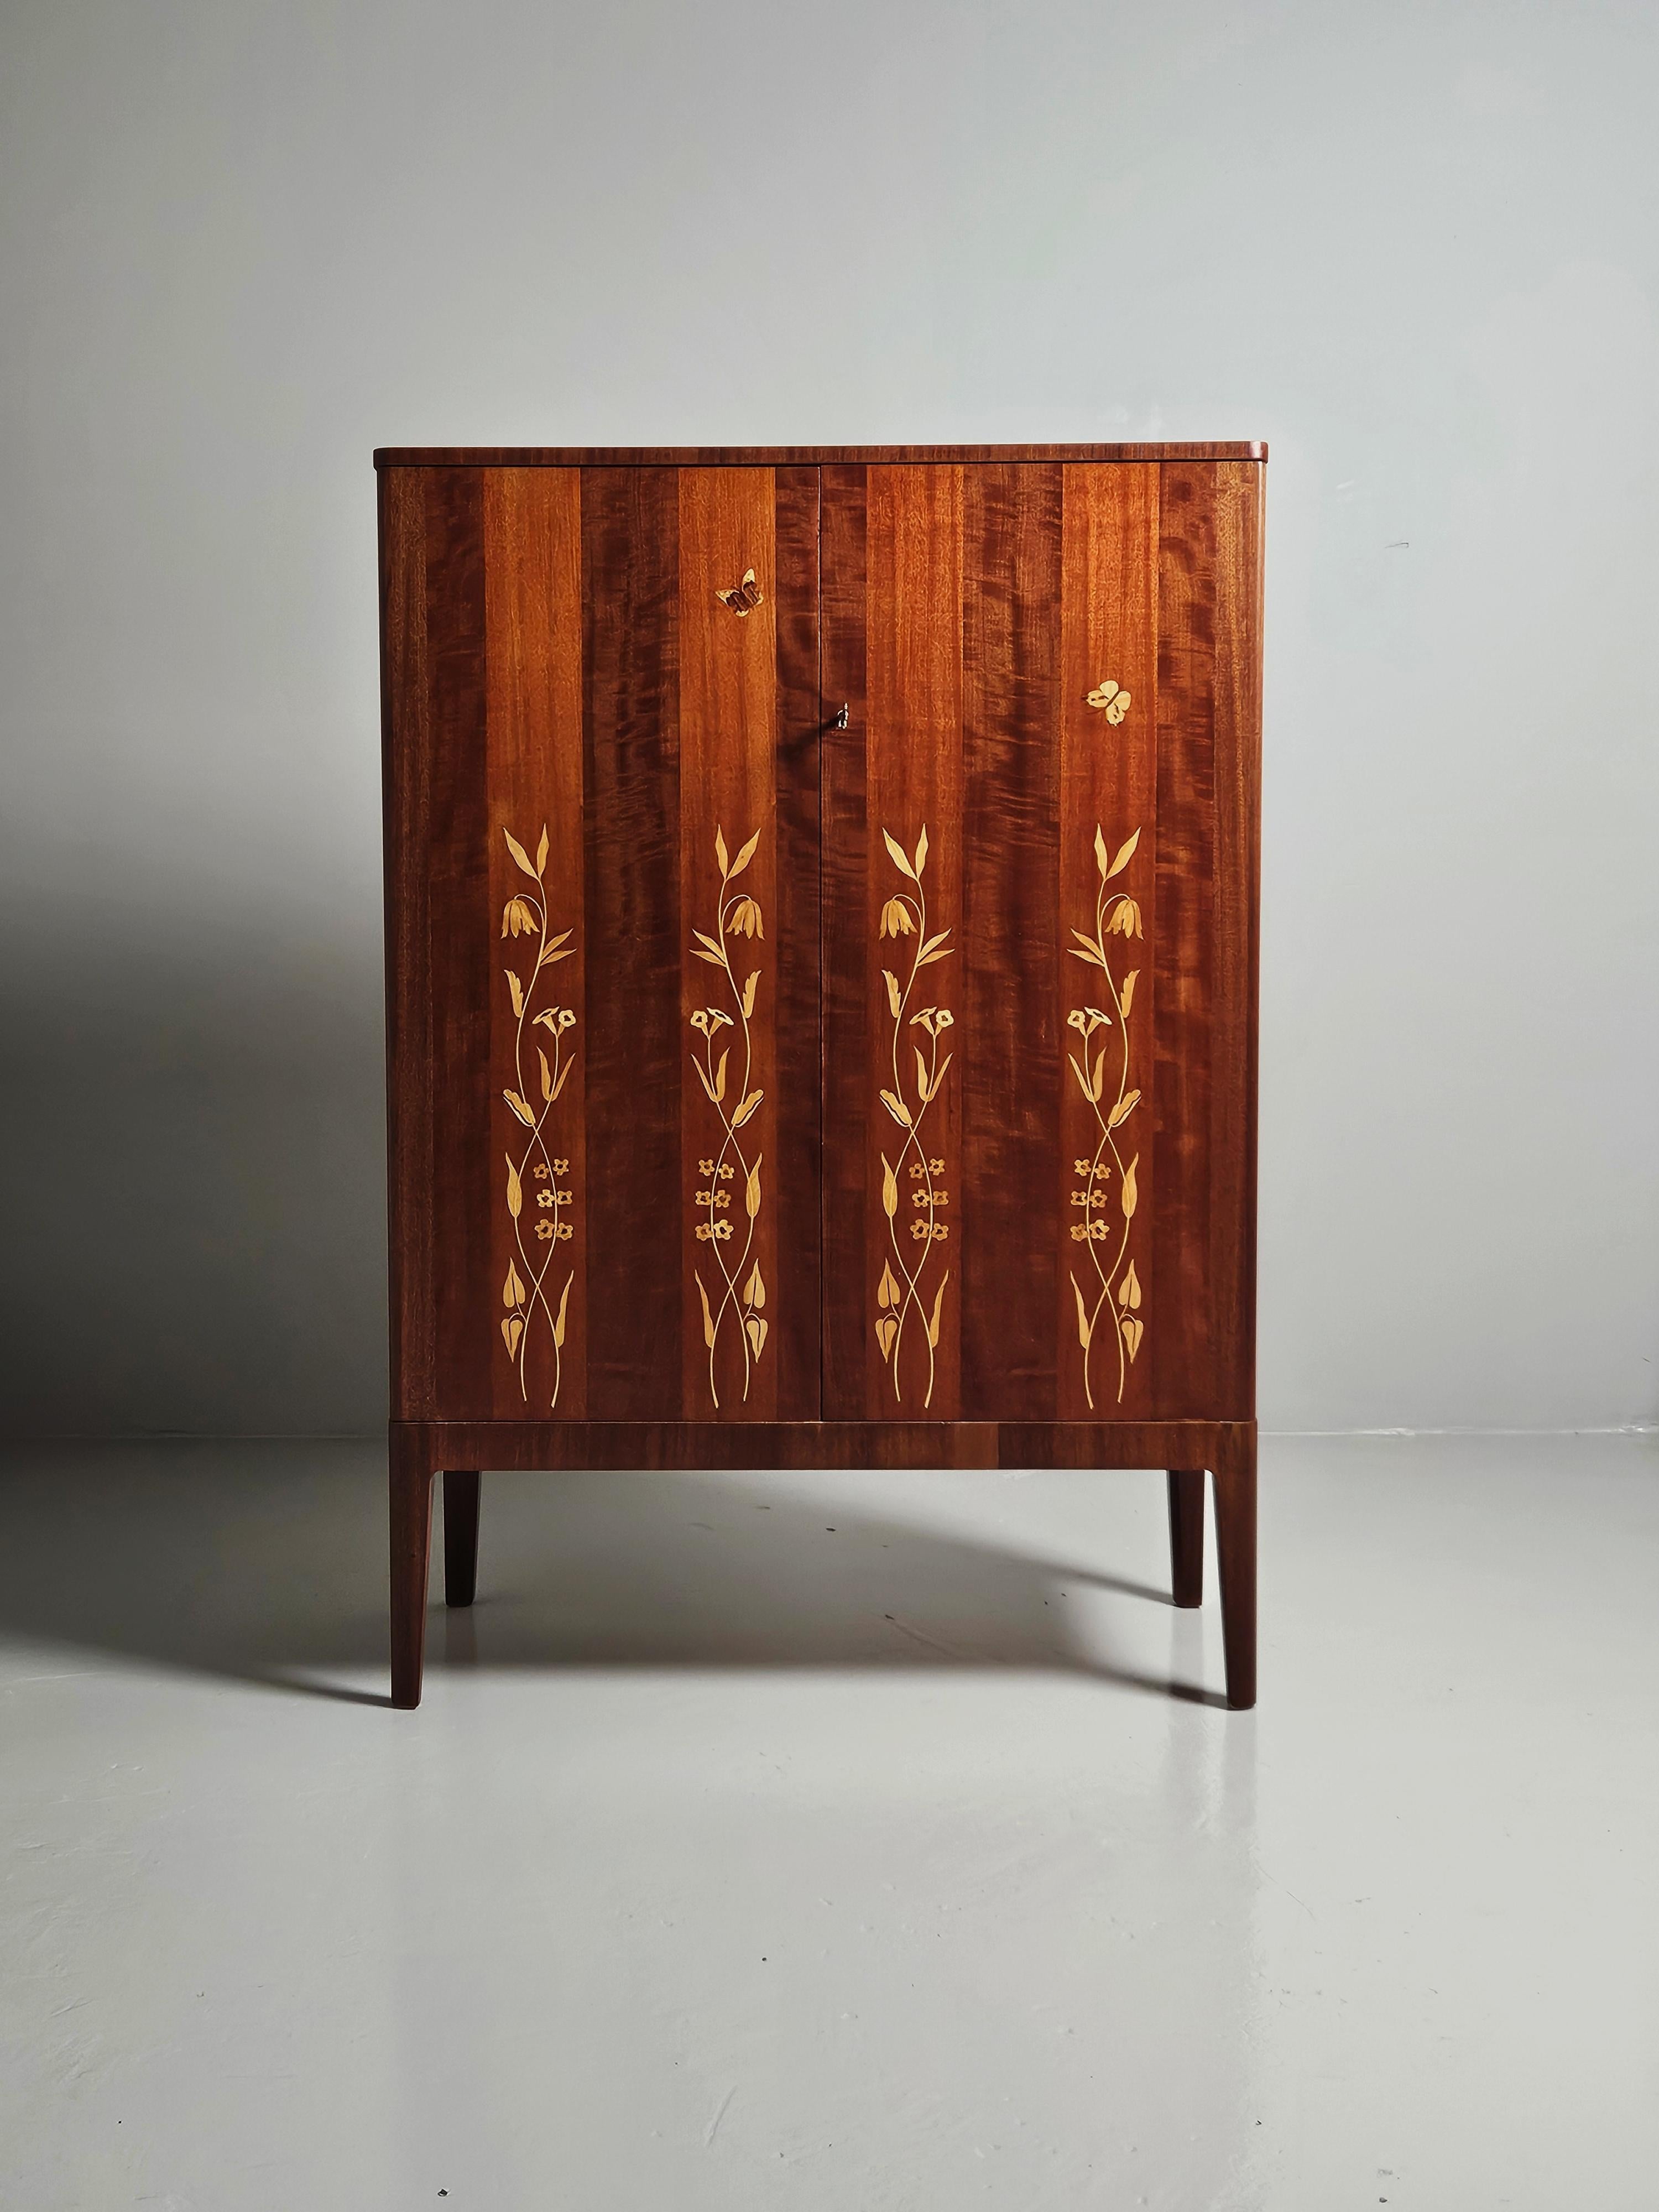 Rare cabinet produced by Möbelbolaget Tranås, Sweden, during the 1940s. 

Made in mahogany with a beautiful floral inlay. 